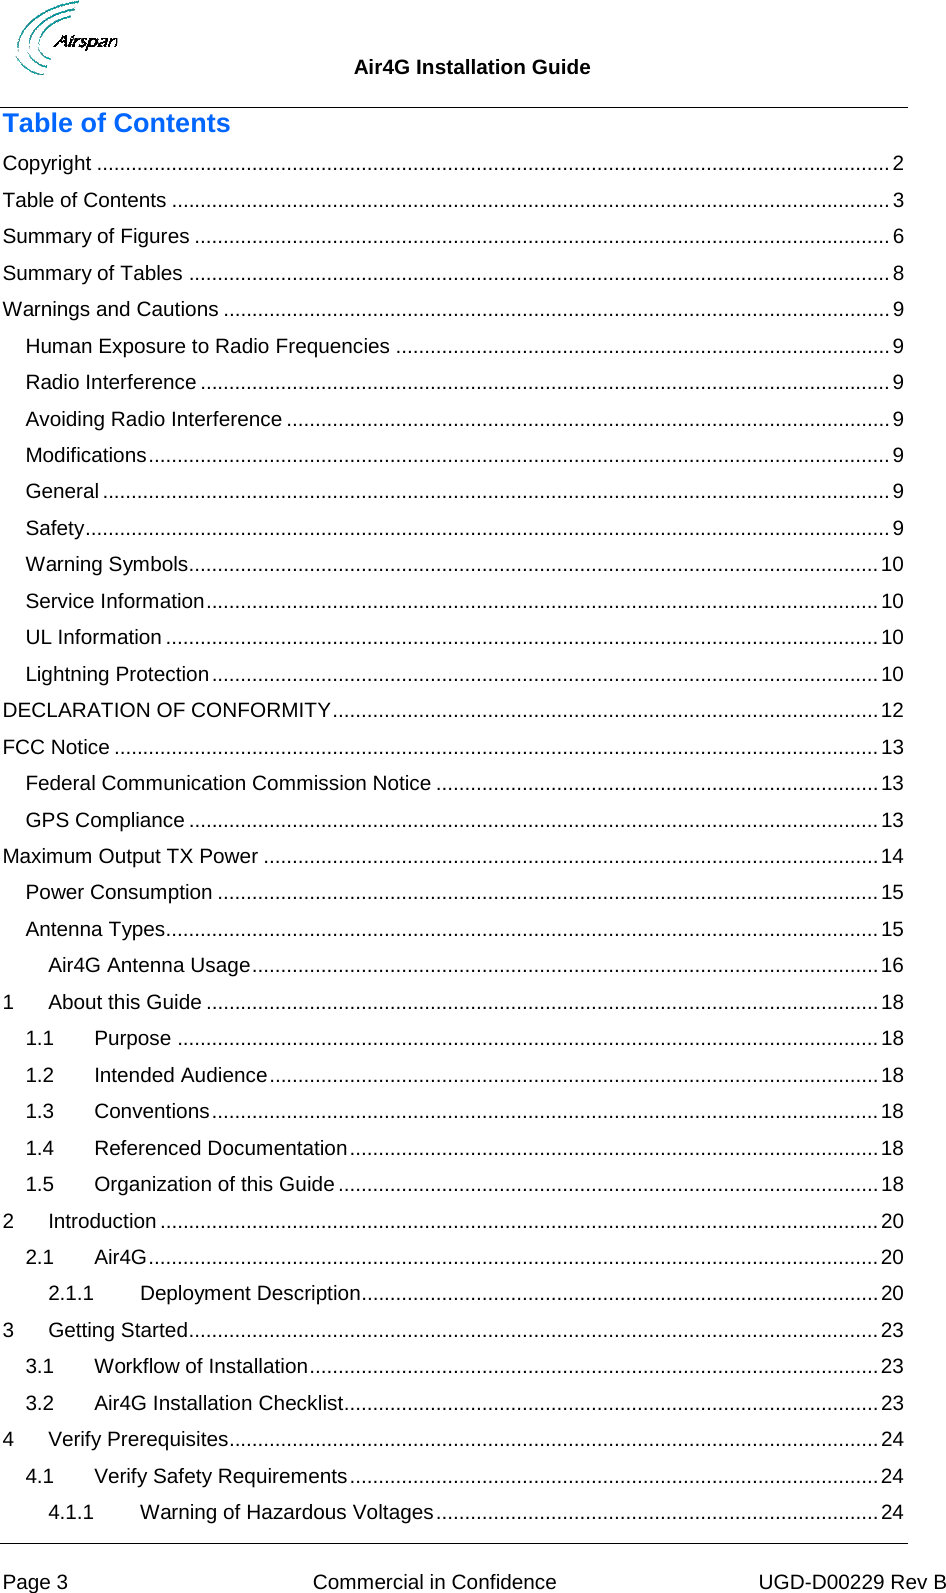  Air4G Installation Guide     Page 3  Commercial in Confidence UGD-D00229 Rev B Table of Contents Copyright .......................................................................................................................................... 2 Table of Contents ............................................................................................................................. 3 Summary of Figures ......................................................................................................................... 6 Summary of Tables .......................................................................................................................... 8 Warnings and Cautions .................................................................................................................... 9 Human Exposure to Radio Frequencies ...................................................................................... 9 Radio Interference ........................................................................................................................ 9 Avoiding Radio Interference ......................................................................................................... 9 Modifications ................................................................................................................................. 9 General ......................................................................................................................................... 9 Safety ............................................................................................................................................ 9 Warning Symbols........................................................................................................................ 10 Service Information ..................................................................................................................... 10 UL Information ............................................................................................................................ 10 Lightning Protection .................................................................................................................... 10 DECLARATION OF CONFORMITY ............................................................................................... 12 FCC Notice ..................................................................................................................................... 13 Federal Communication Commission Notice ............................................................................. 13 GPS Compliance ........................................................................................................................ 13 Maximum Output TX Power ........................................................................................................... 14 Power Consumption ................................................................................................................... 15 Antenna Types............................................................................................................................ 15 Air4G Antenna Usage ............................................................................................................. 16 1 About this Guide ..................................................................................................................... 18 1.1 Purpose .......................................................................................................................... 18 1.2 Intended Audience .......................................................................................................... 18 1.3 Conventions .................................................................................................................... 18 1.4 Referenced Documentation ............................................................................................ 18 1.5 Organization of this Guide .............................................................................................. 18 2 Introduction ............................................................................................................................. 20 2.1 Air4G ............................................................................................................................... 20 2.1.1 Deployment Description.......................................................................................... 20 3 Getting Started ........................................................................................................................ 23 3.1 Workflow of Installation ................................................................................................... 23 3.2 Air4G Installation Checklist ............................................................................................. 23 4 Verify Prerequisites................................................................................................................. 24 4.1 Verify Safety Requirements ............................................................................................ 24 4.1.1 Warning of Hazardous Voltages ............................................................................. 24 